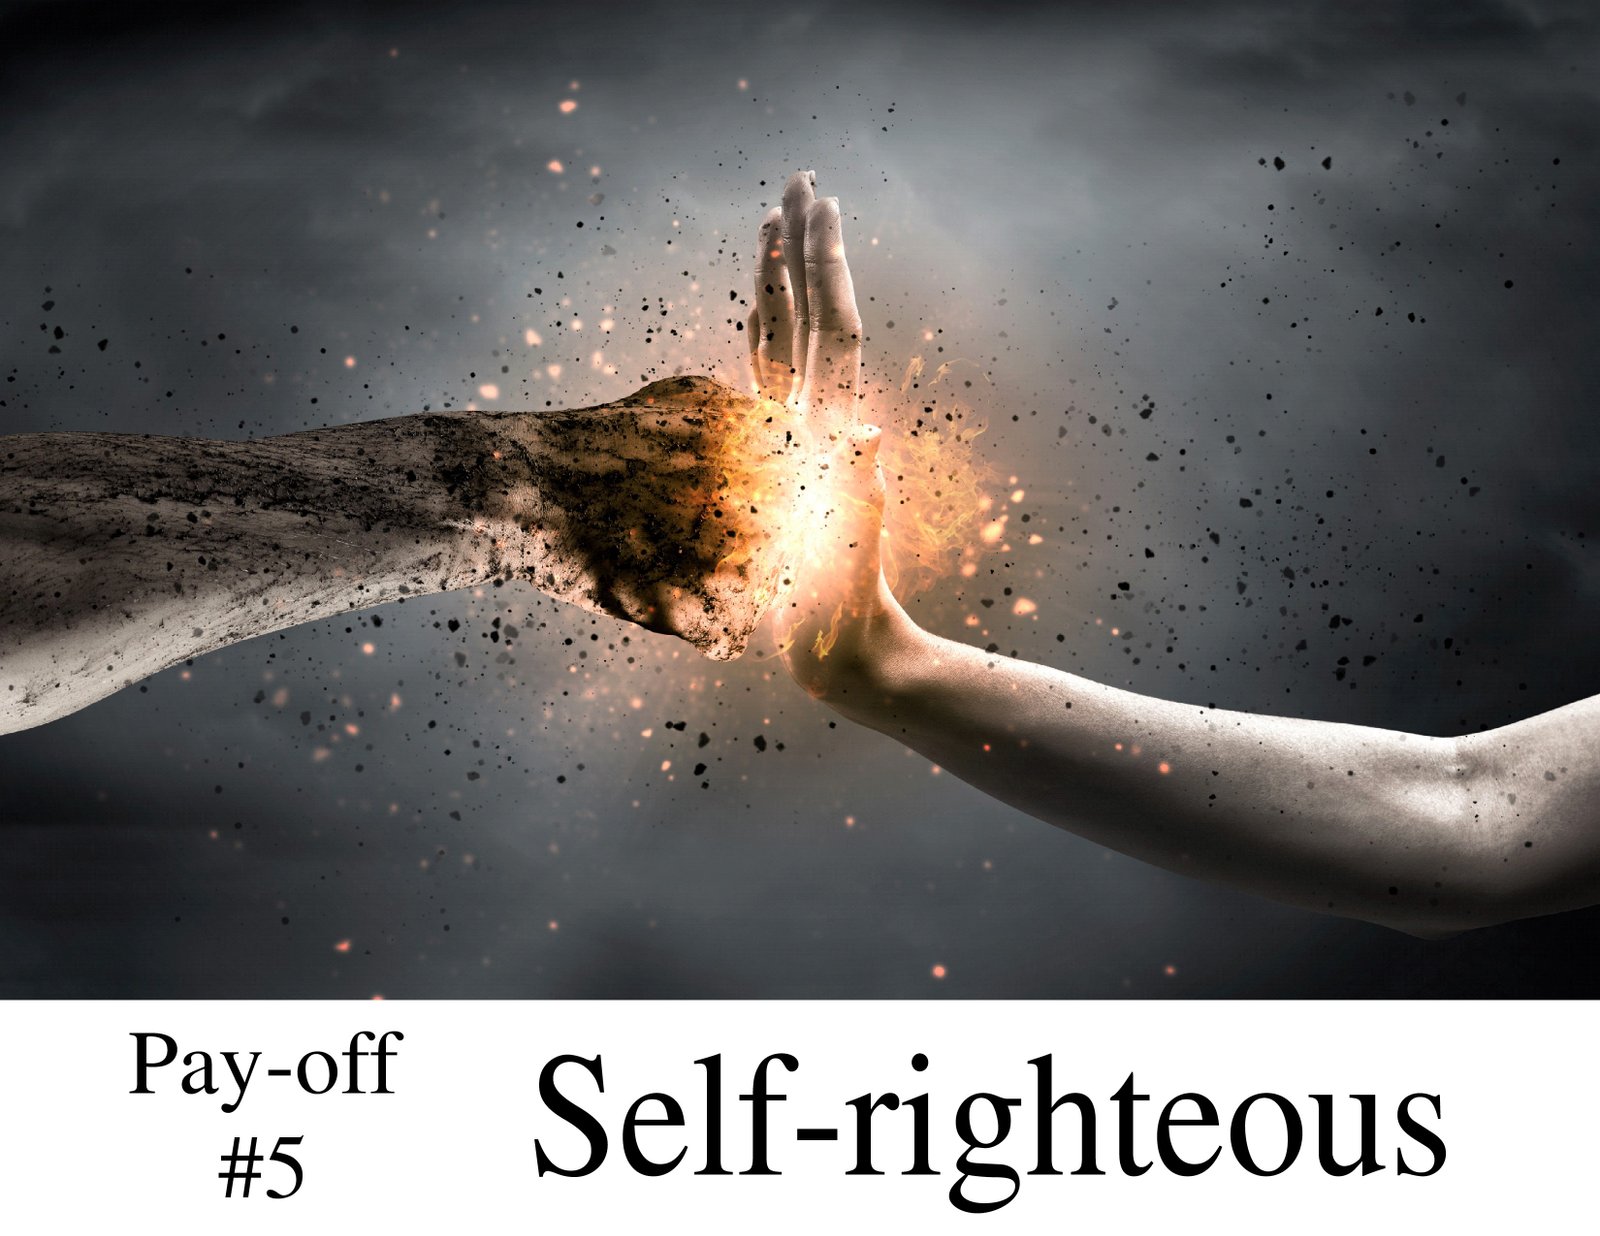 Pay-off #5 Self righteous